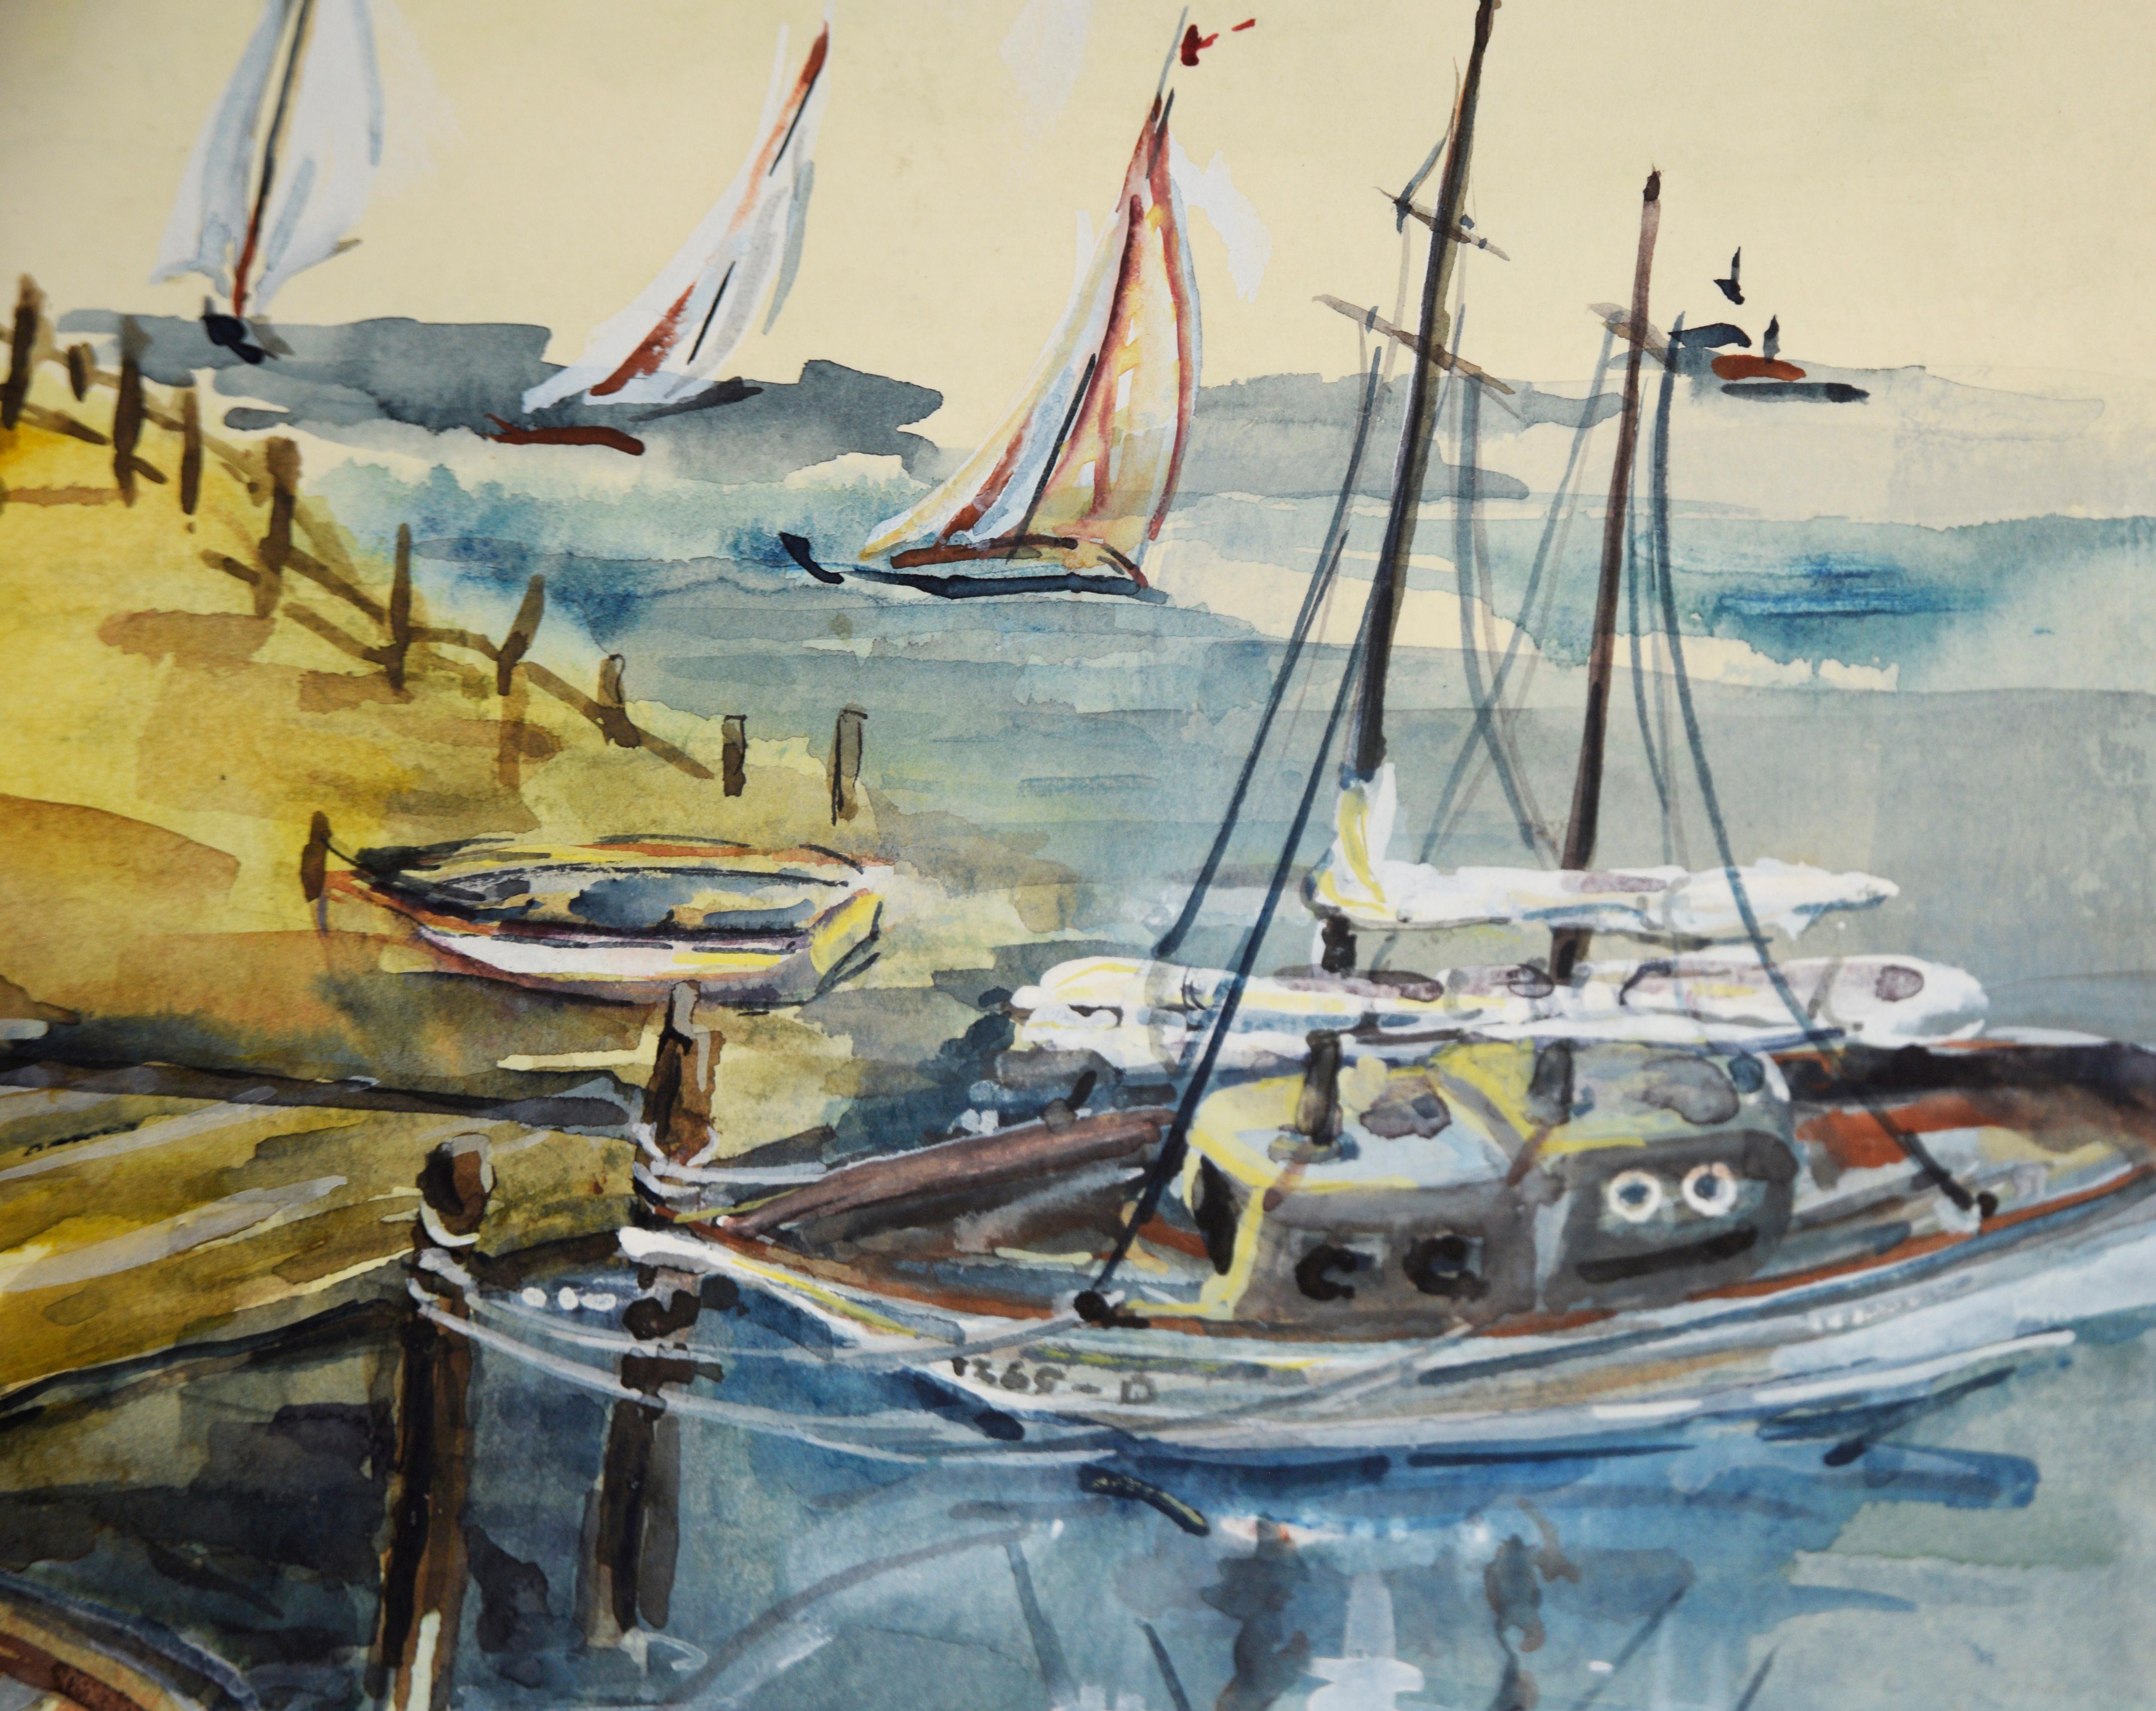 Lou's Landing - Original Watercolor On Paper

Original watercolor on paper by Ray Skelton (American 20th c.), depicting a boat harbor with numerous boats tied up, some sailing. Lou's Landing bait shop sits at the harbors edge. 

Signed 